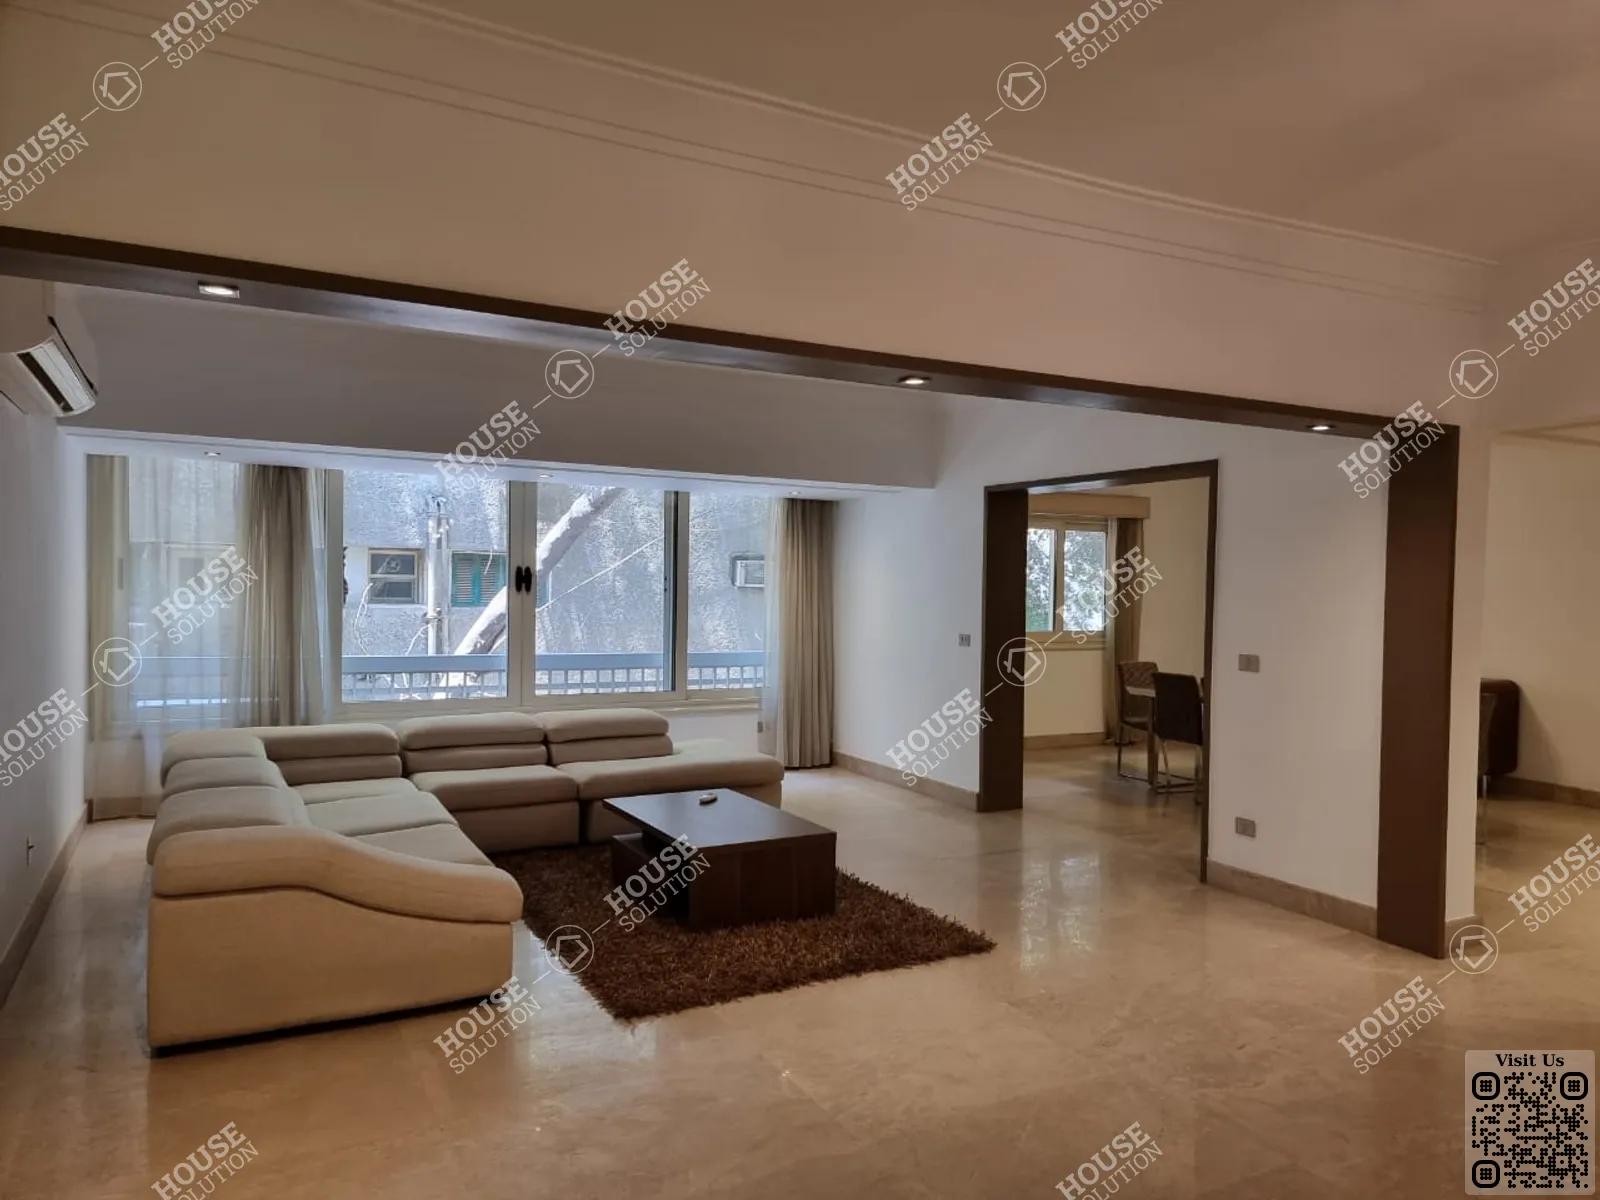 RECEPTION  @ Apartments For Rent In Maadi Maadi Sarayat Area: 220 m² consists of 3 Bedrooms 3 Bathrooms Modern furnished 5 stars #5537-0